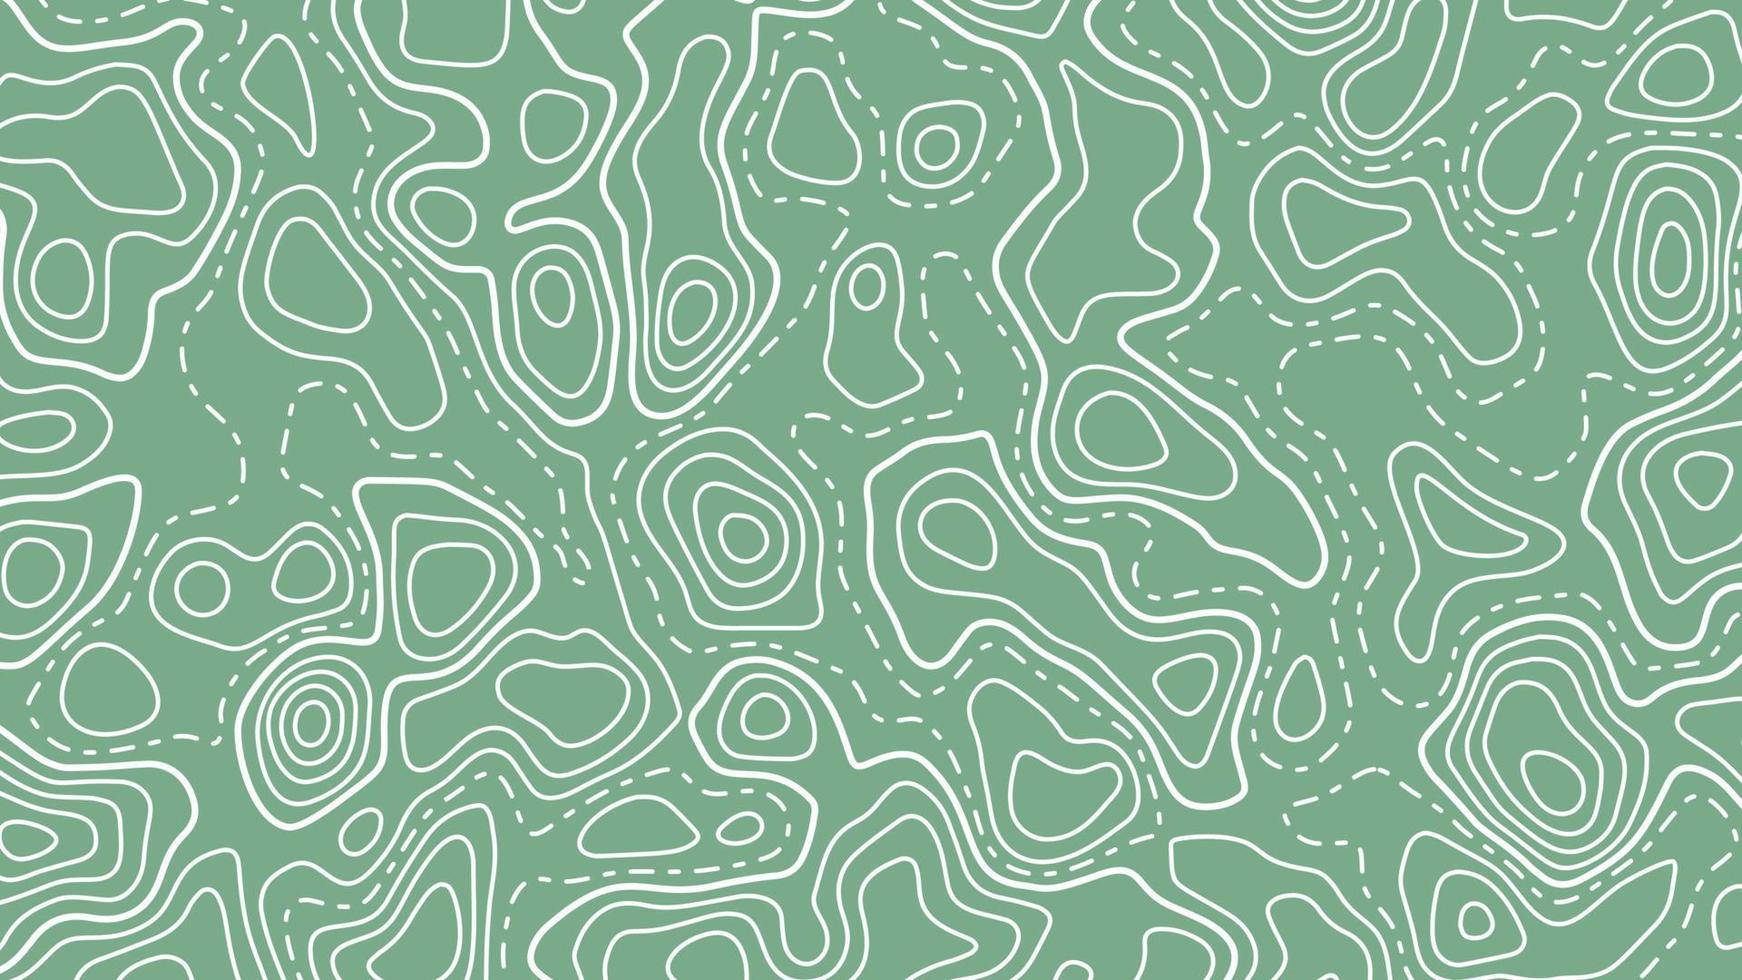 Topographic map background. Abstract wavy lines. vector